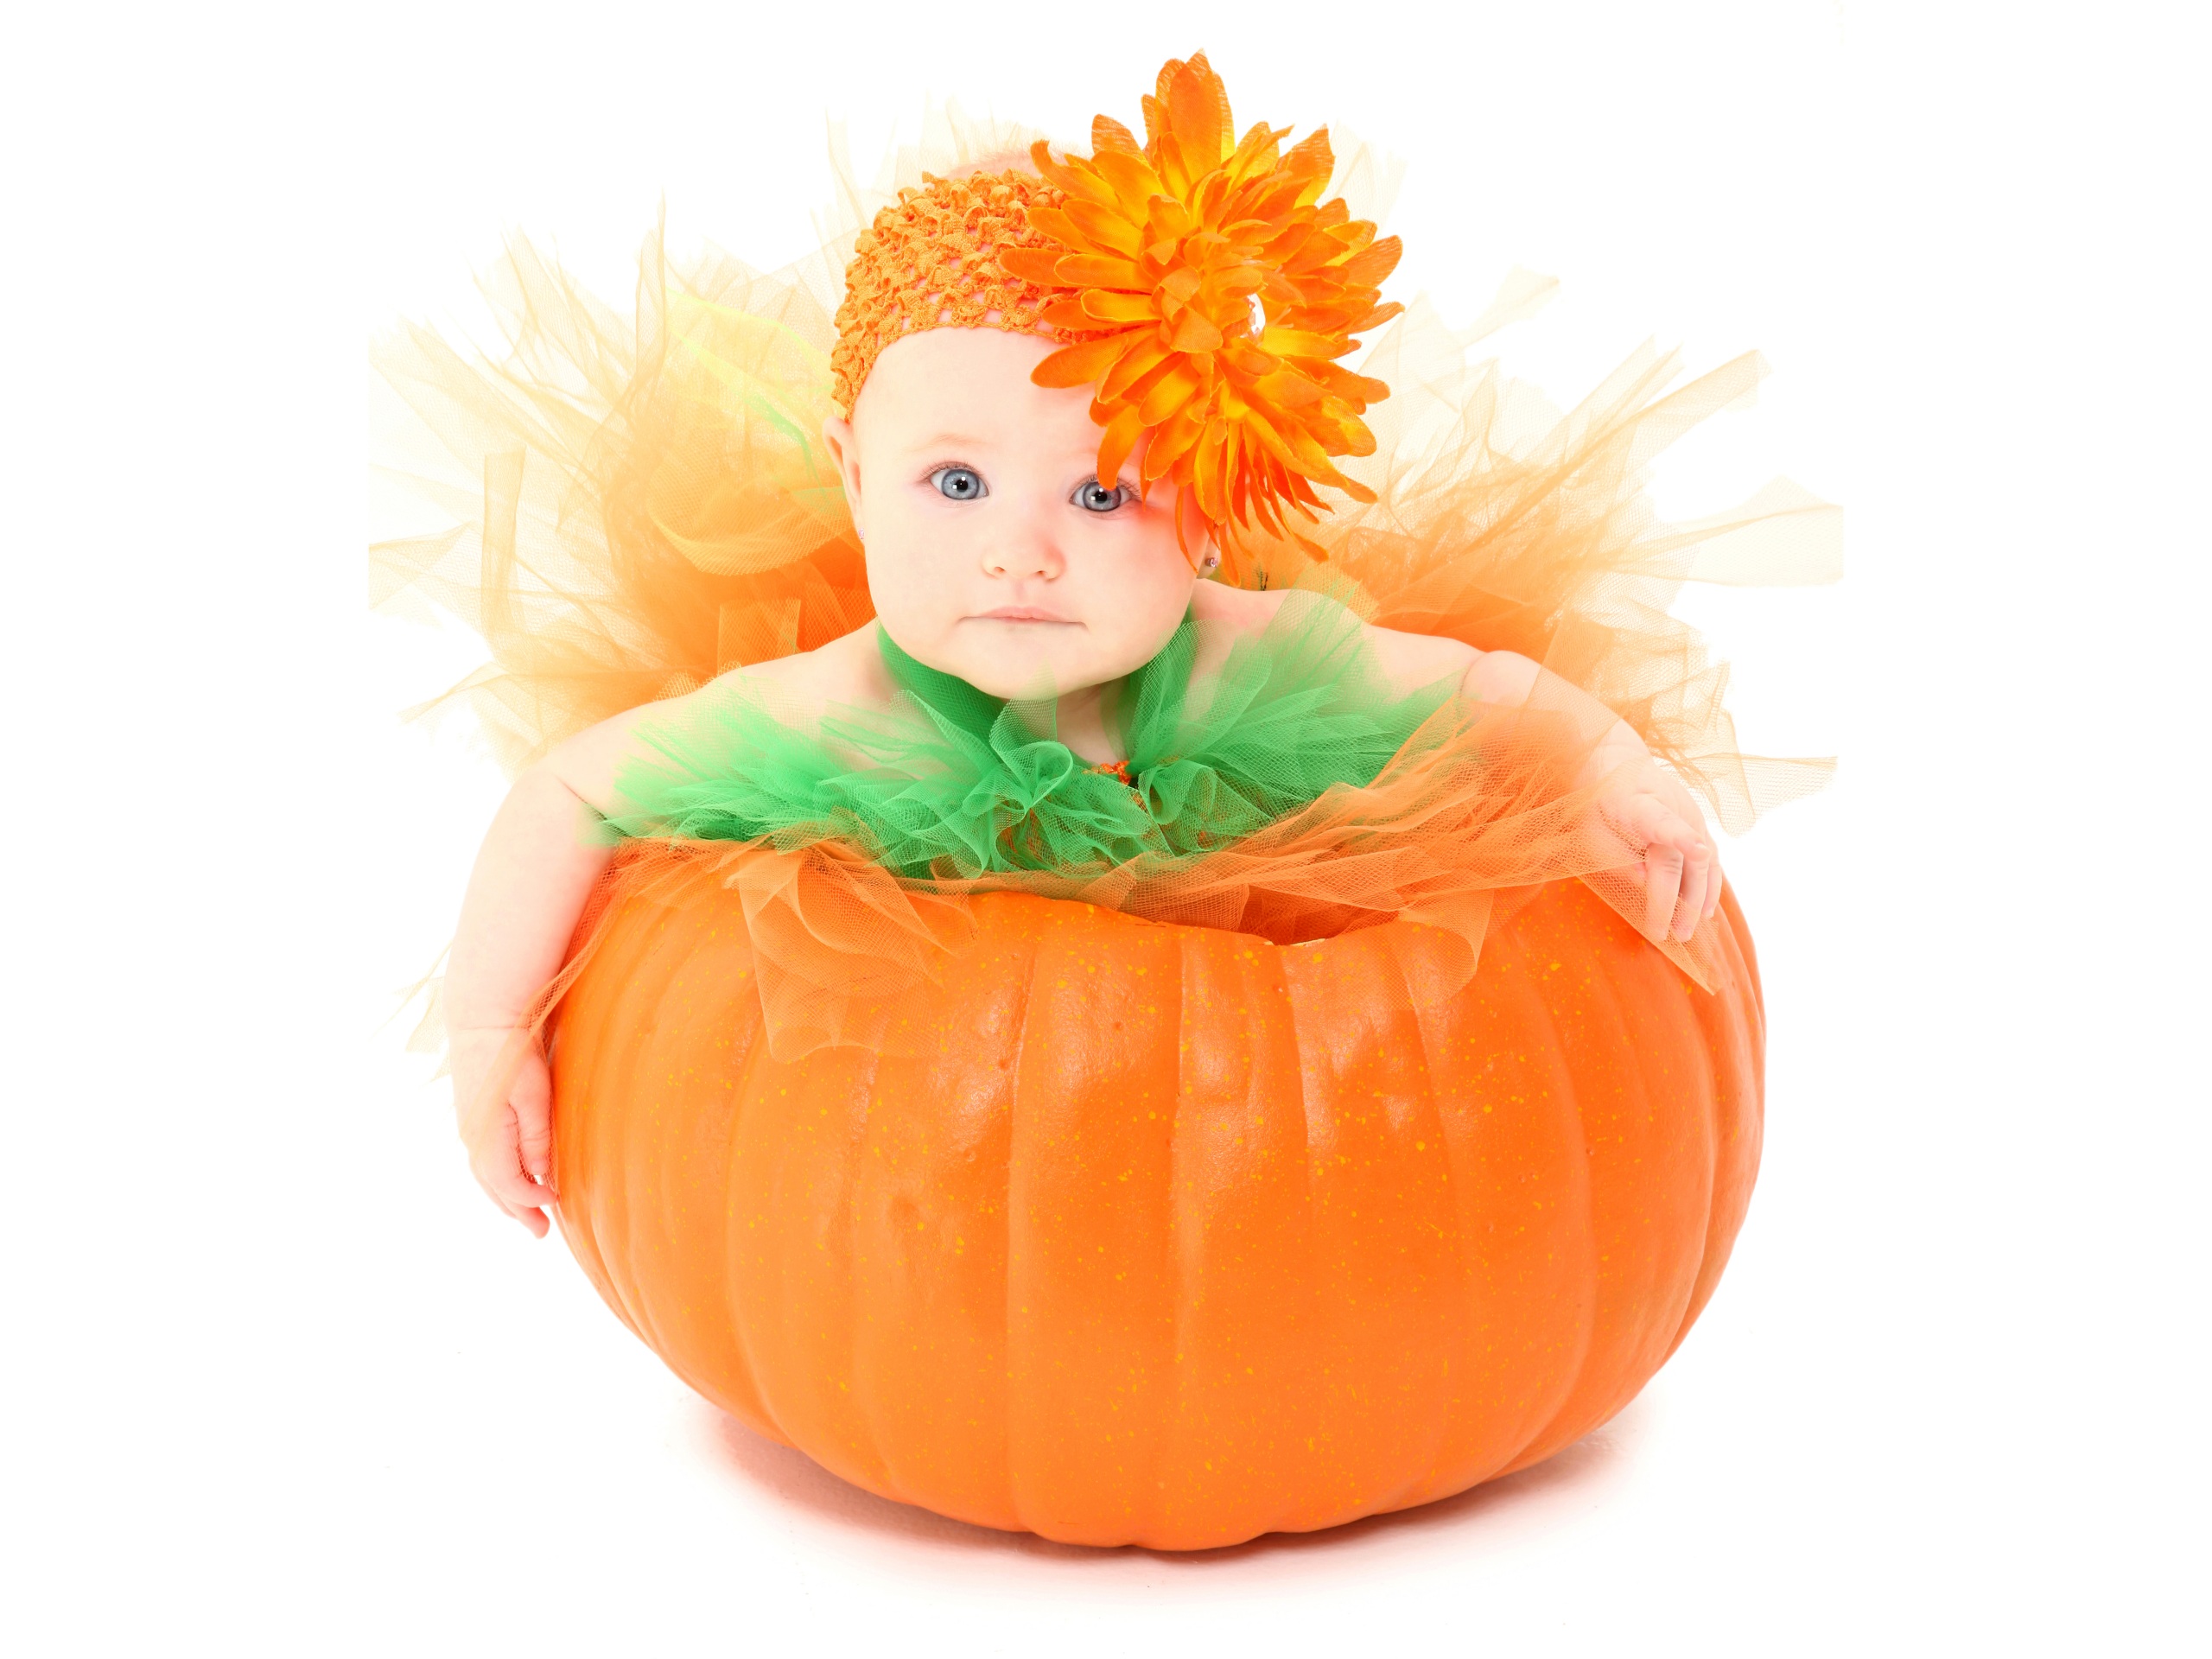 photography, baby, cute, orange flower, pumpkin for android